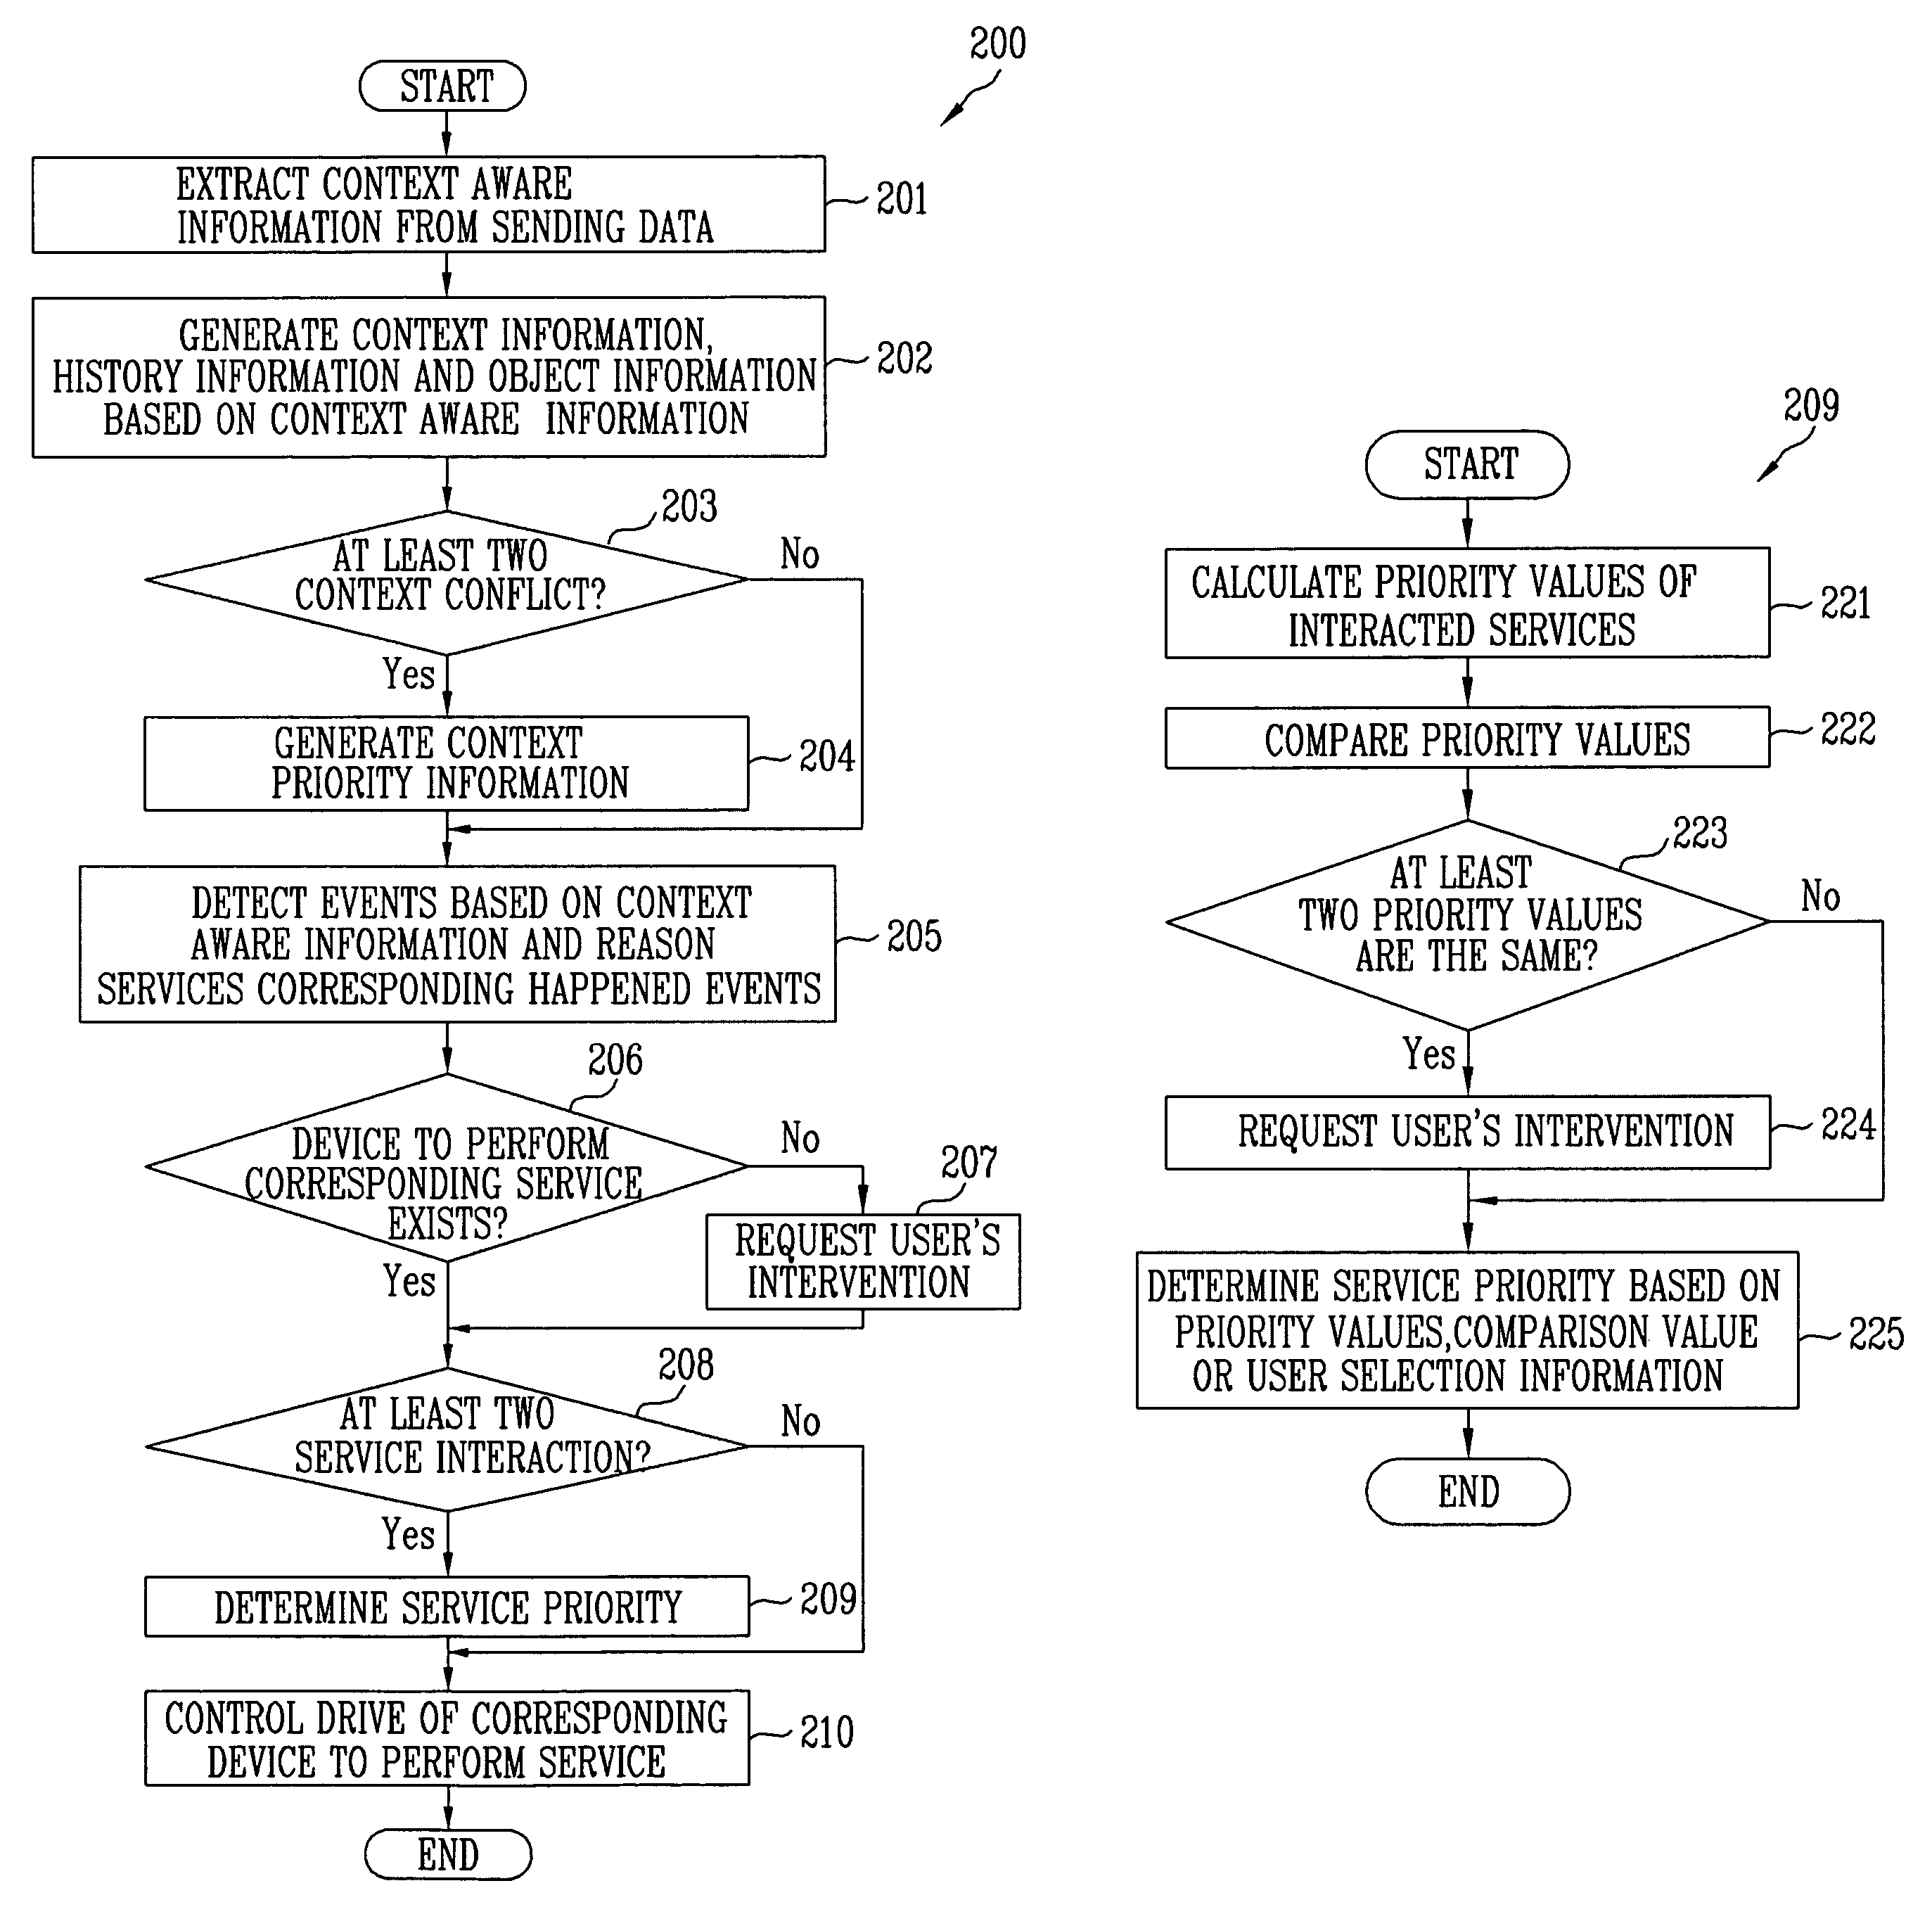 Intelligent management apparatus and method of digital home network system